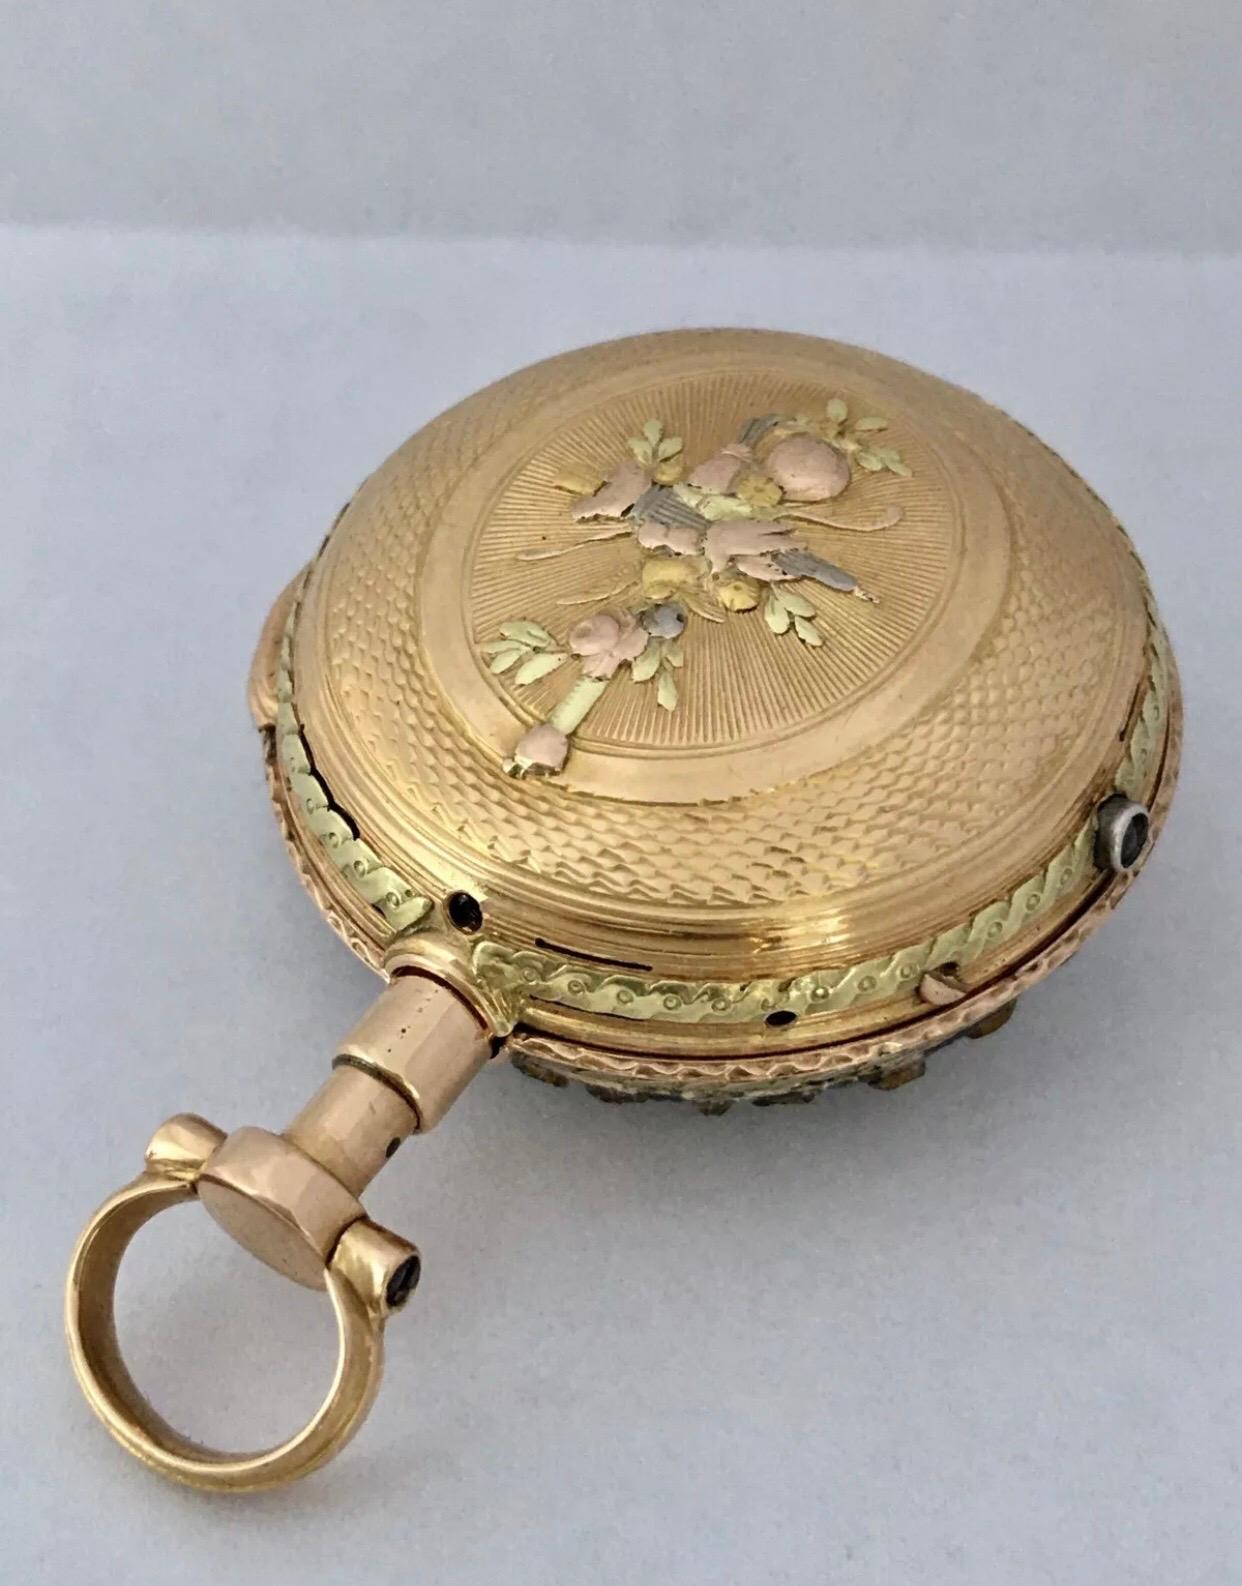 
This early Verge Fusee Gold small pocket watch is Not working. The spring is broken. The balance is good and spinning when shake. Visible signs of ageing and wear with light tiny scratches on the watch case and glass. stones are missing on the